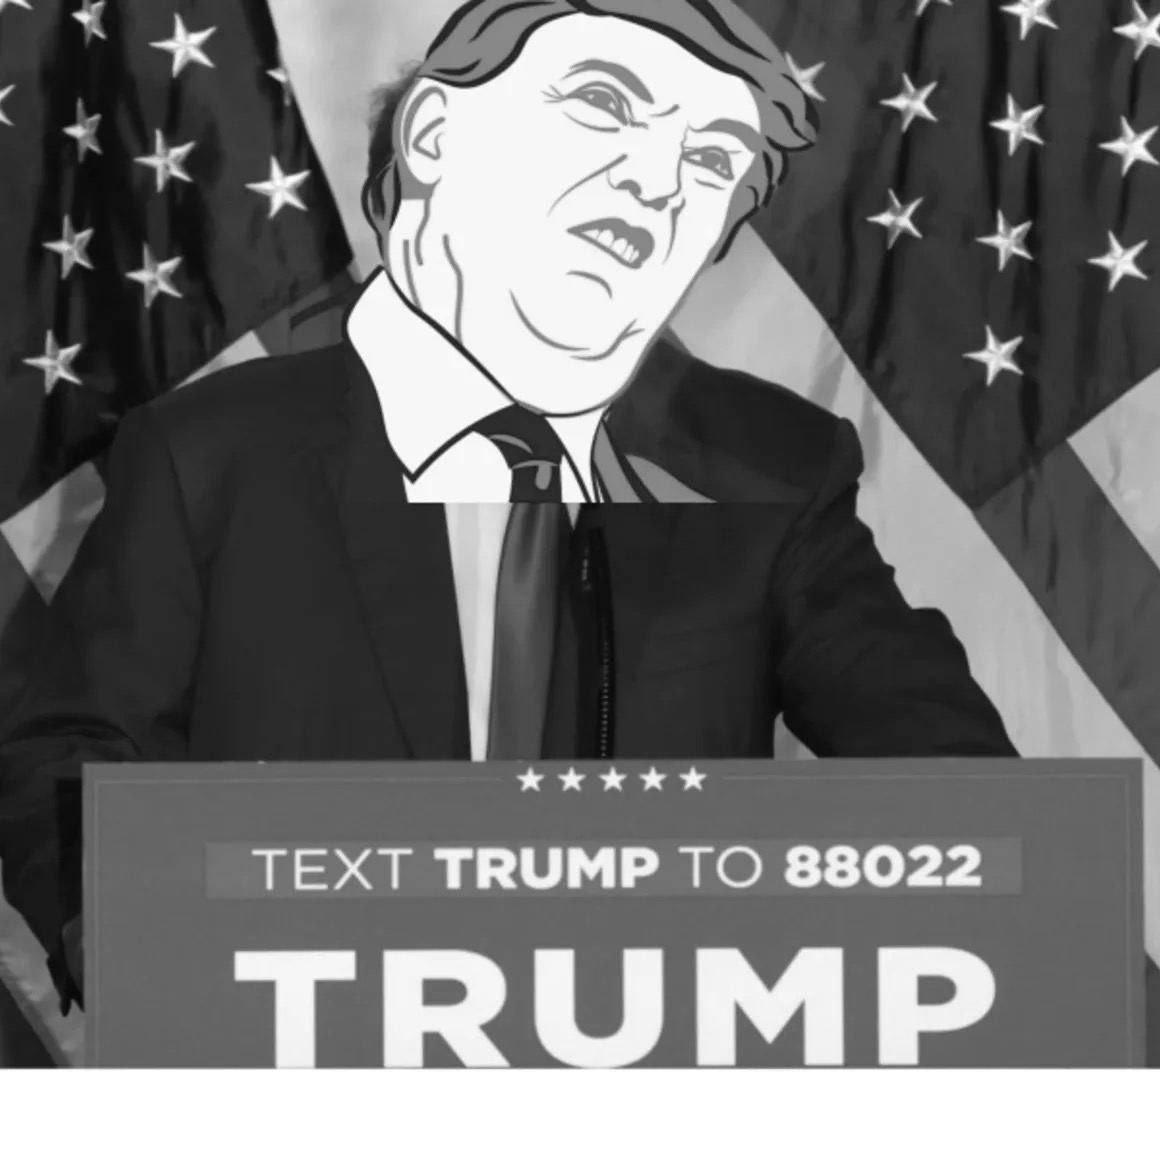 Are you backing Trump? Text Trump To $88022 @88022memecoin the memecoin is live on @base, actively donating @realDonaldTrump to save America again! 50% of the total supply is sent to Trump's official ETH wallet. With LP burnt, contract renounced, and no team token, it's a…